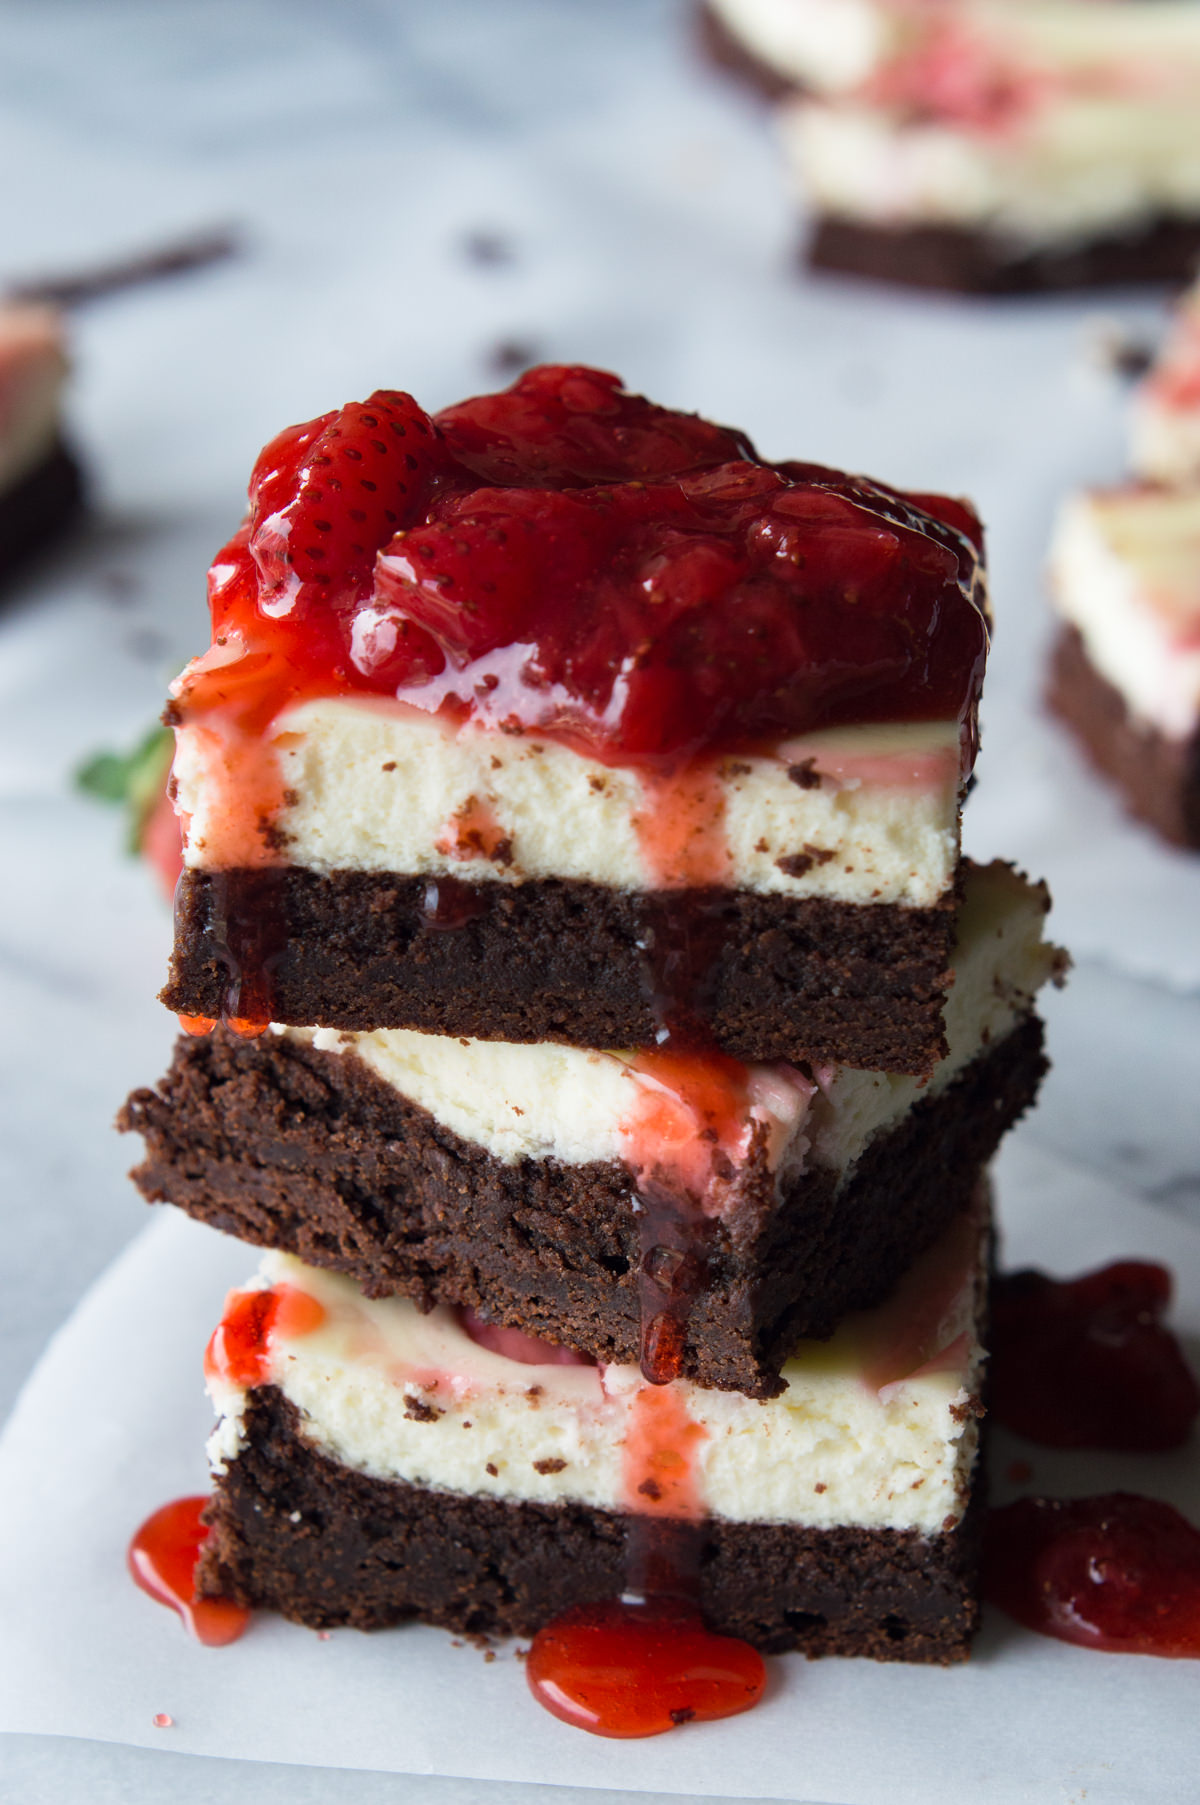 30 delicious strawberry desserts - My Mommy Style